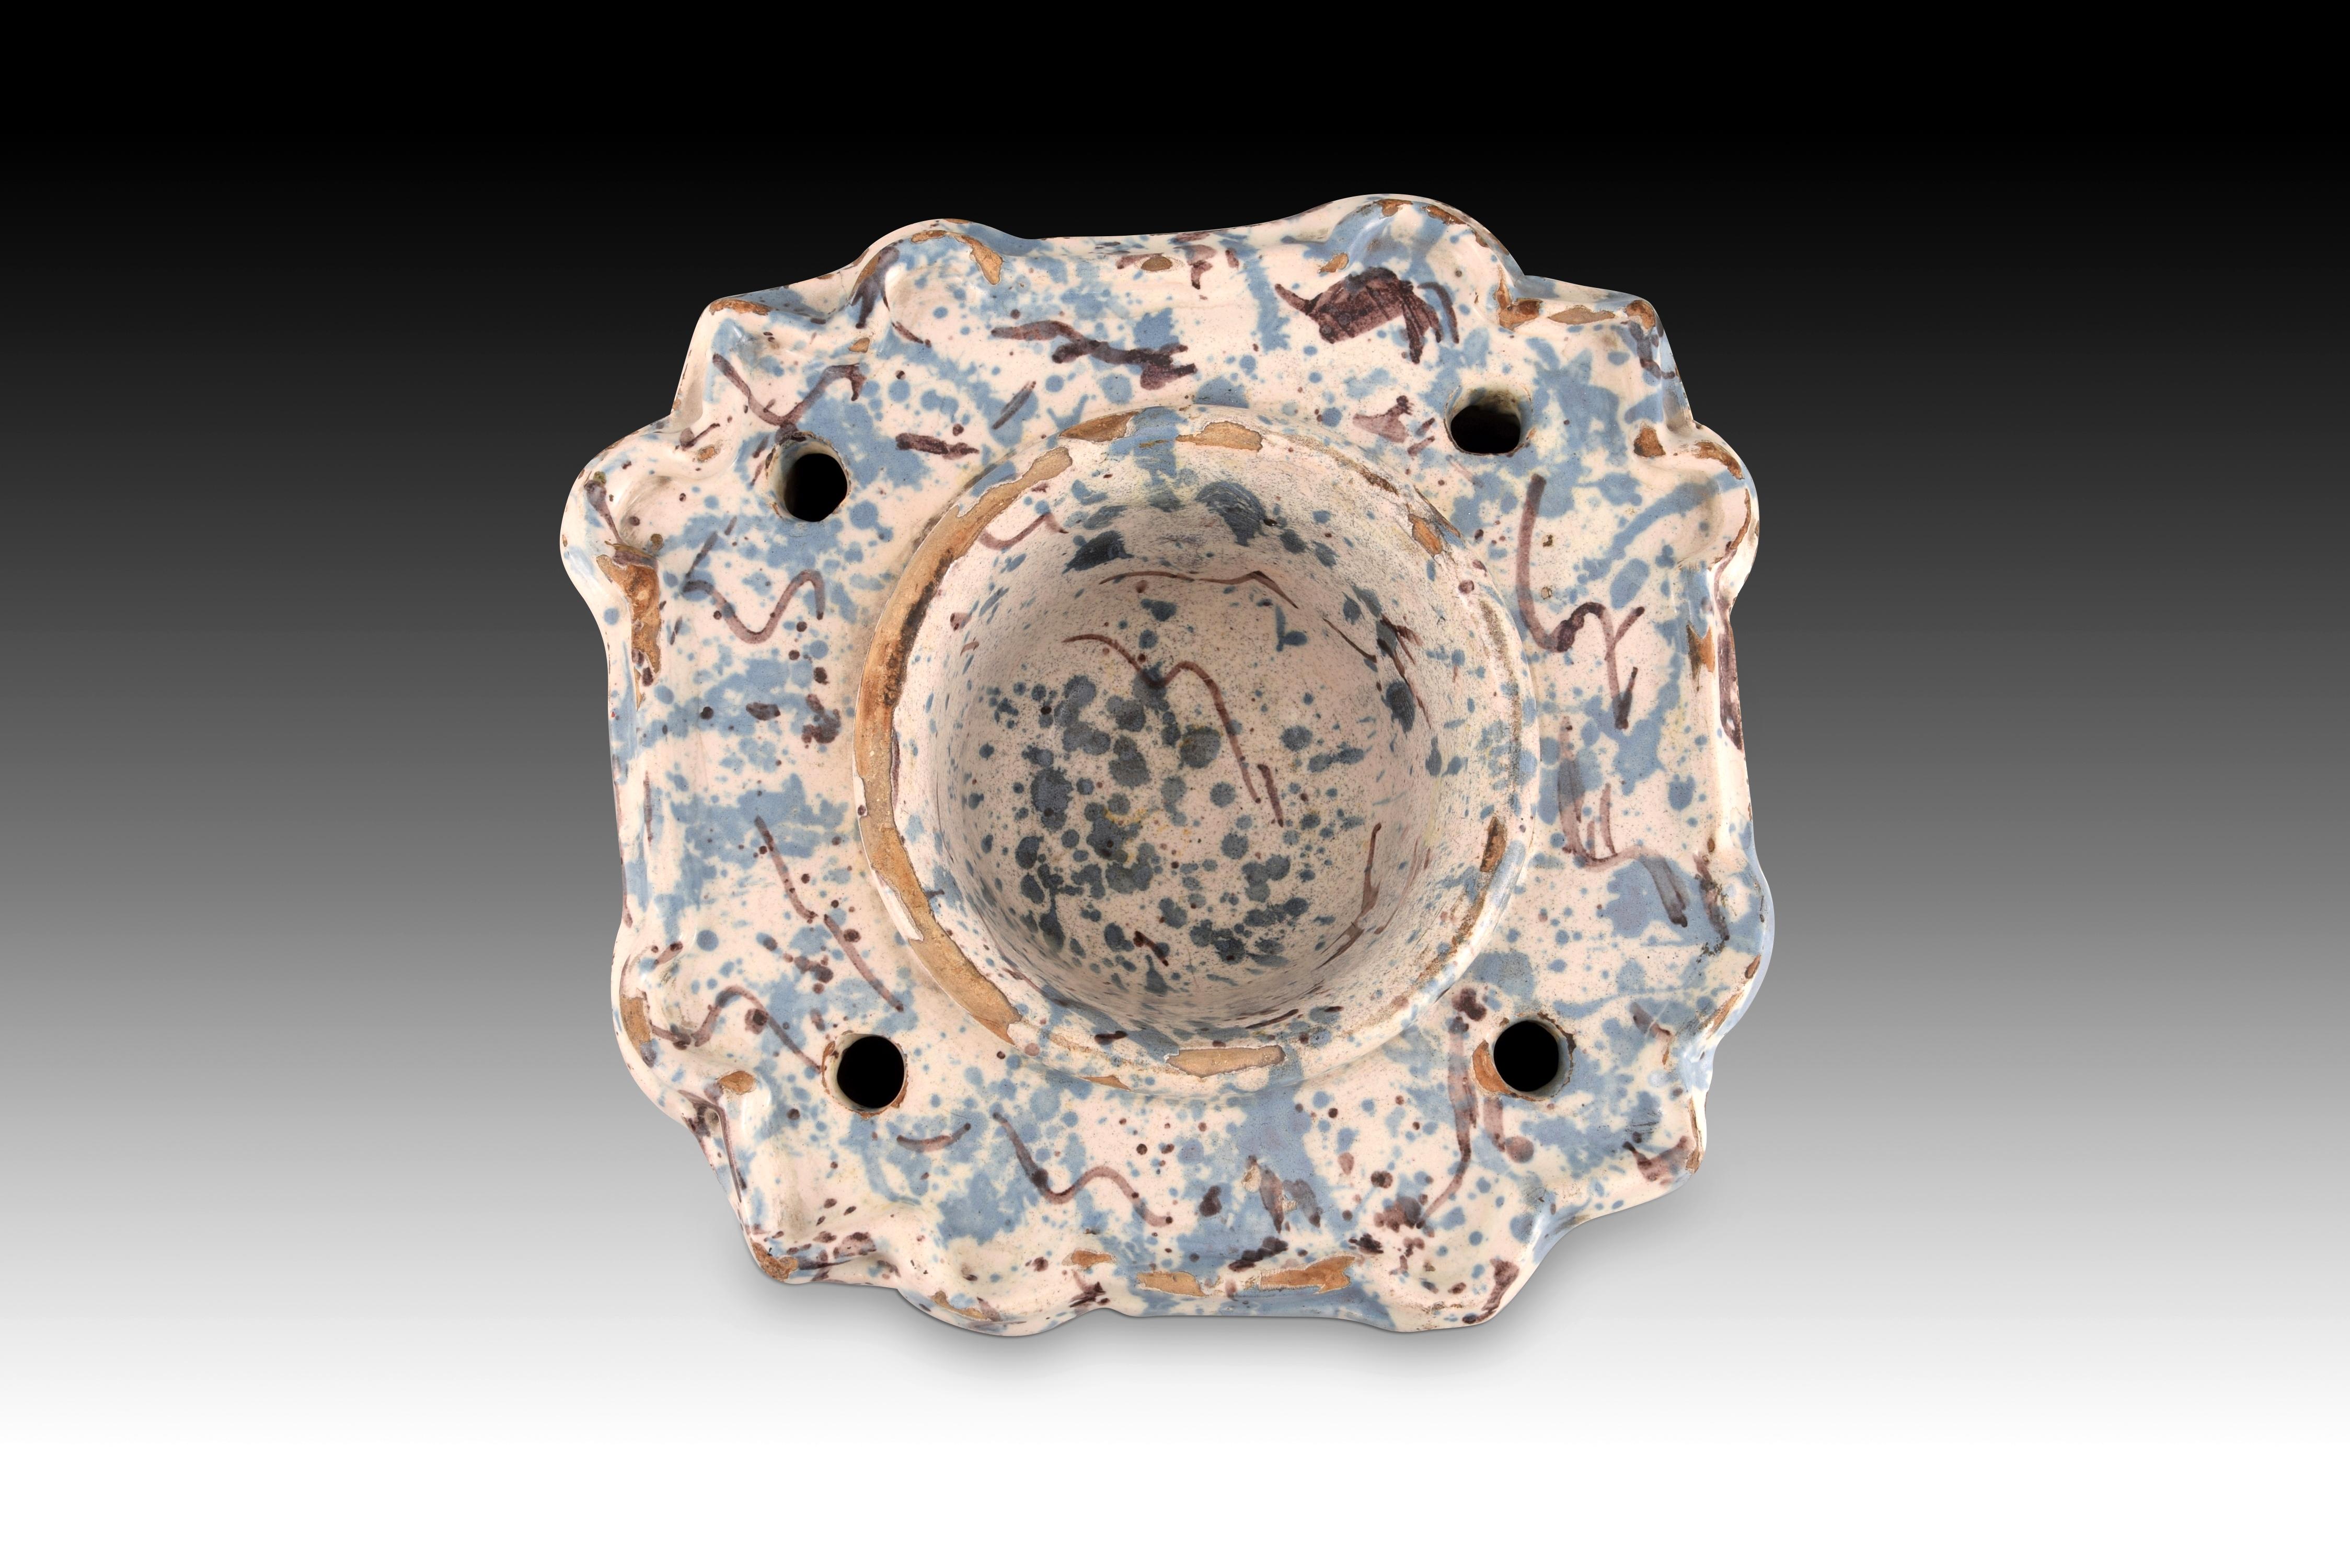 18th Century and Earlier Marbled Ceramic Inkwell, Possibly Talavera, Spain, 17th Century